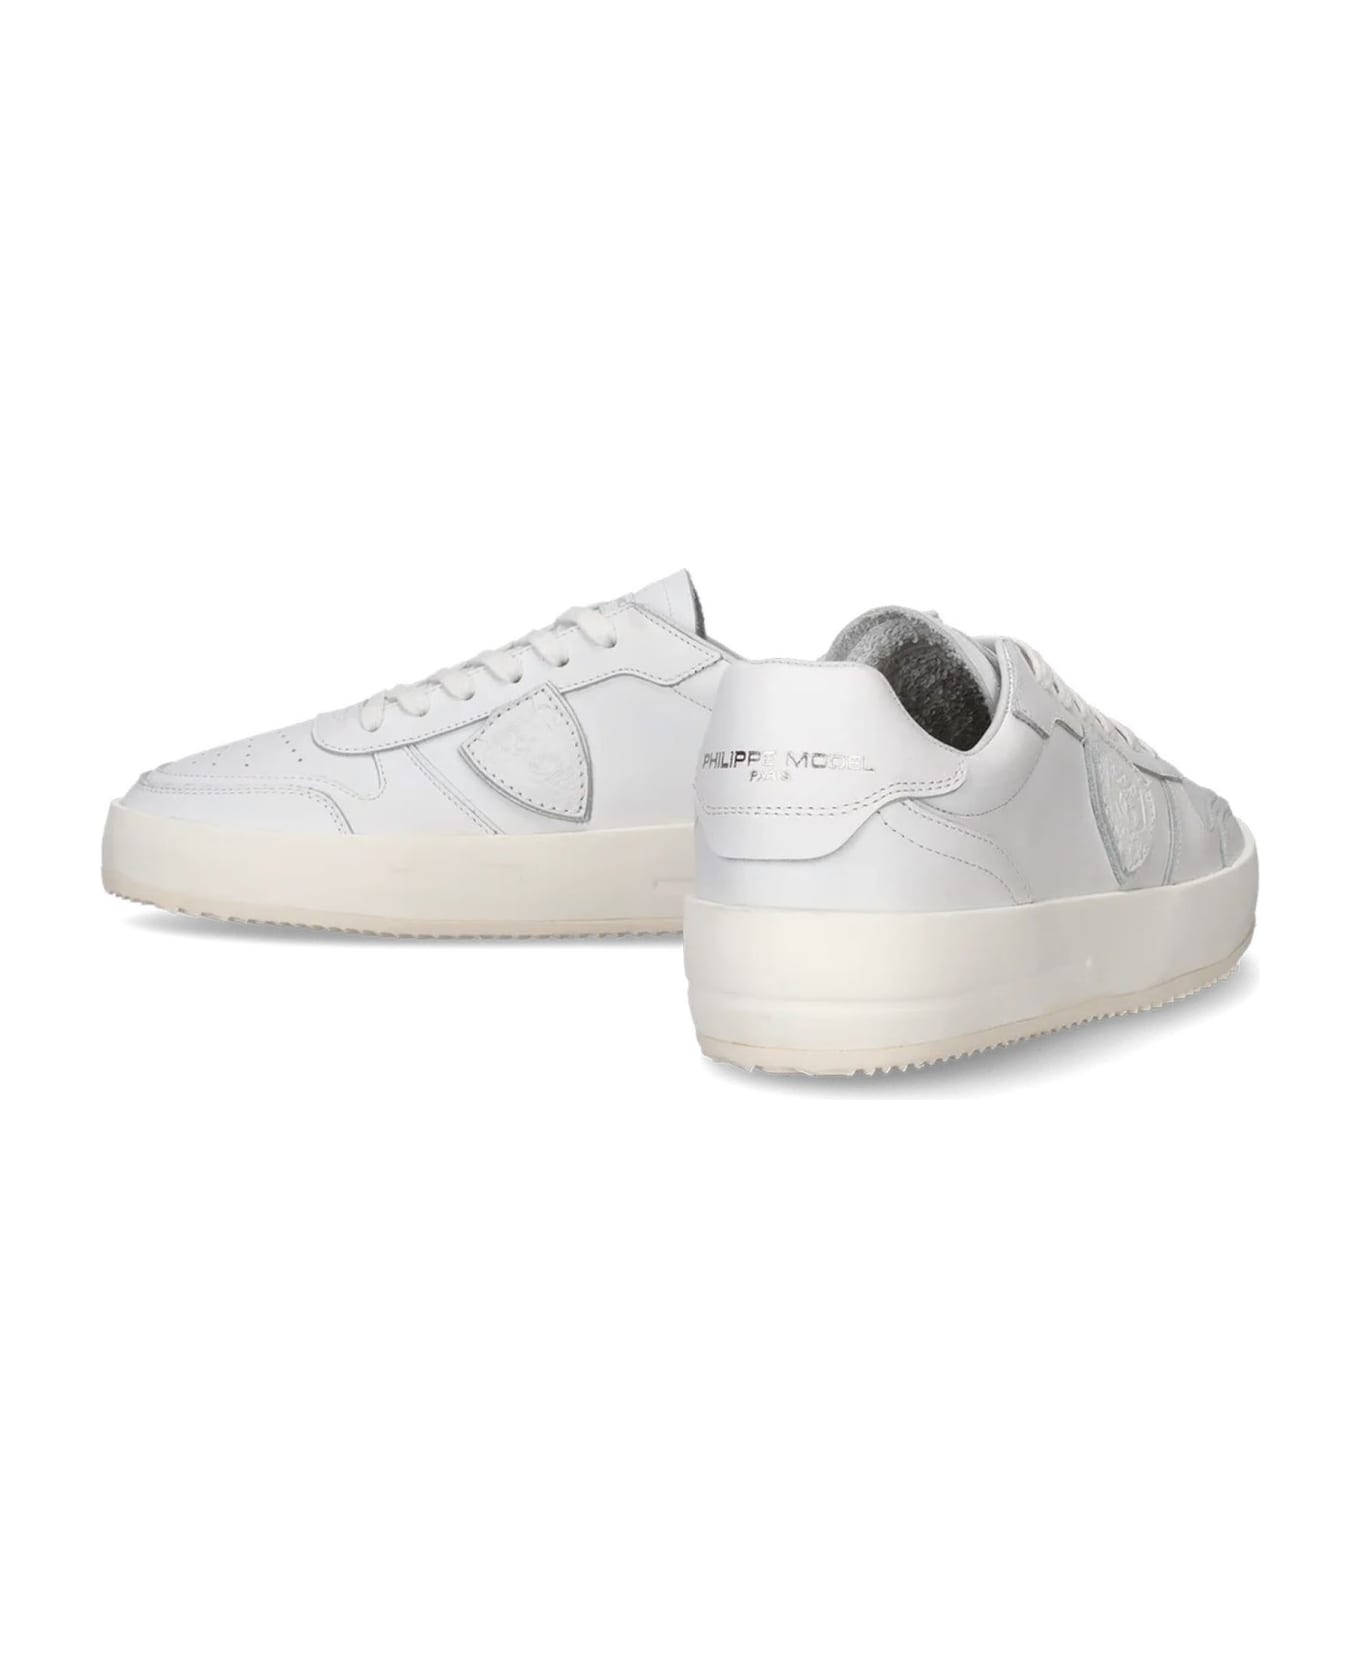 Philippe Model Nice Low-top Sneakers In Leather, White - White スニーカー